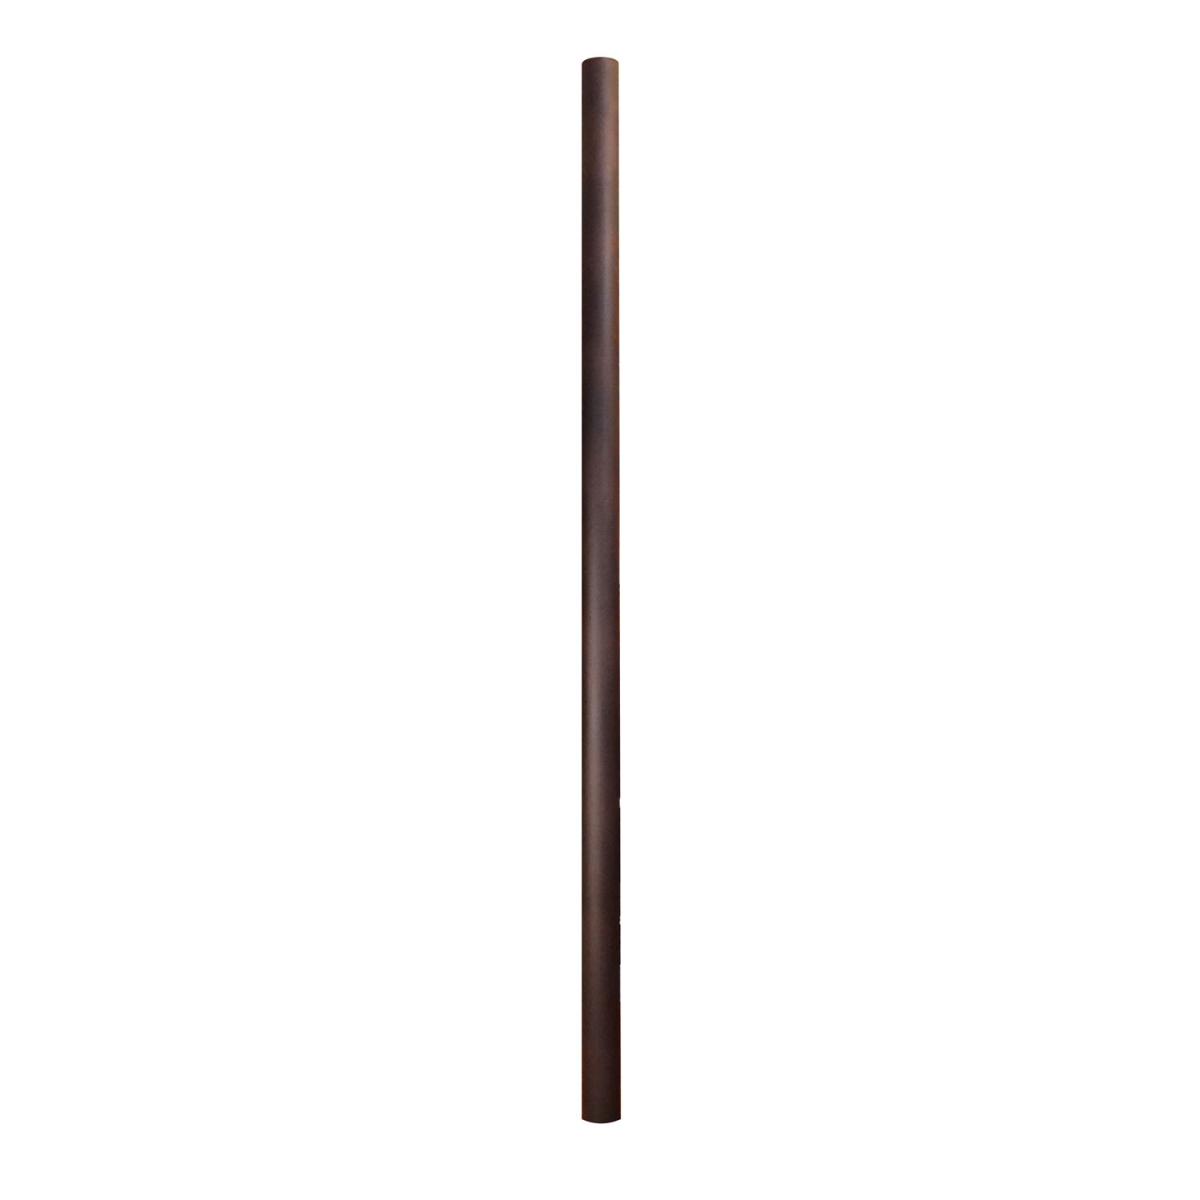 390-pc-orb Smooth Aluminum Direct Burial Post With Photo Cell, Oil Rubbed Bronze